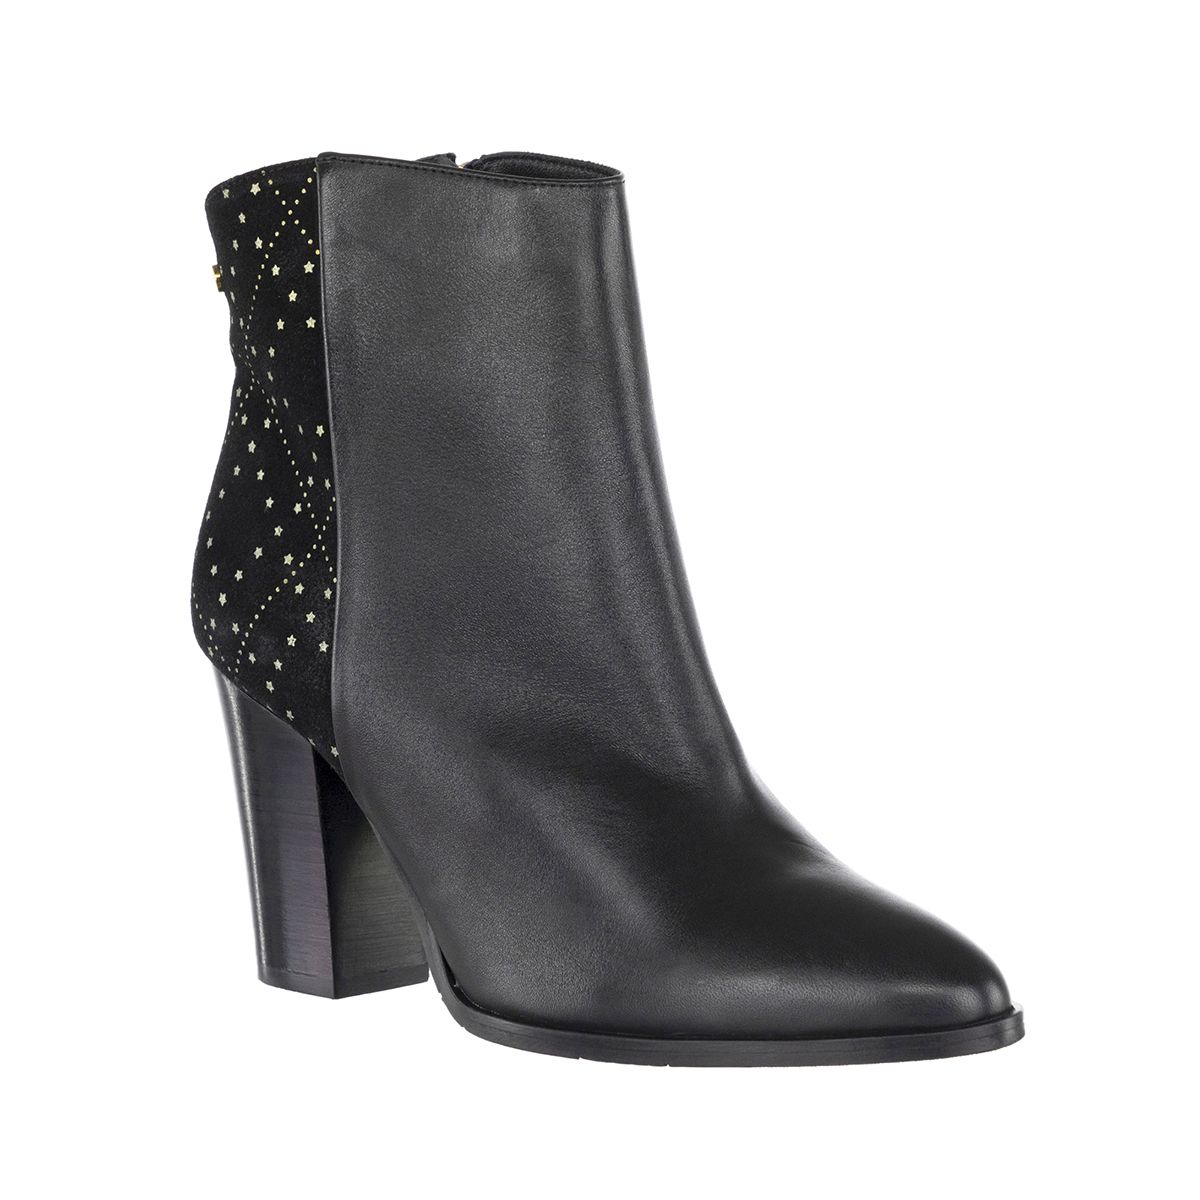 Tommy Hilfiger FW0FW01702-990-41 Paired with a leather jacket, these black ankle boots will give a modern-rock feel to your outfit. The little stars on the back will even give that extra touch of fun. Regular fit and made of leather.